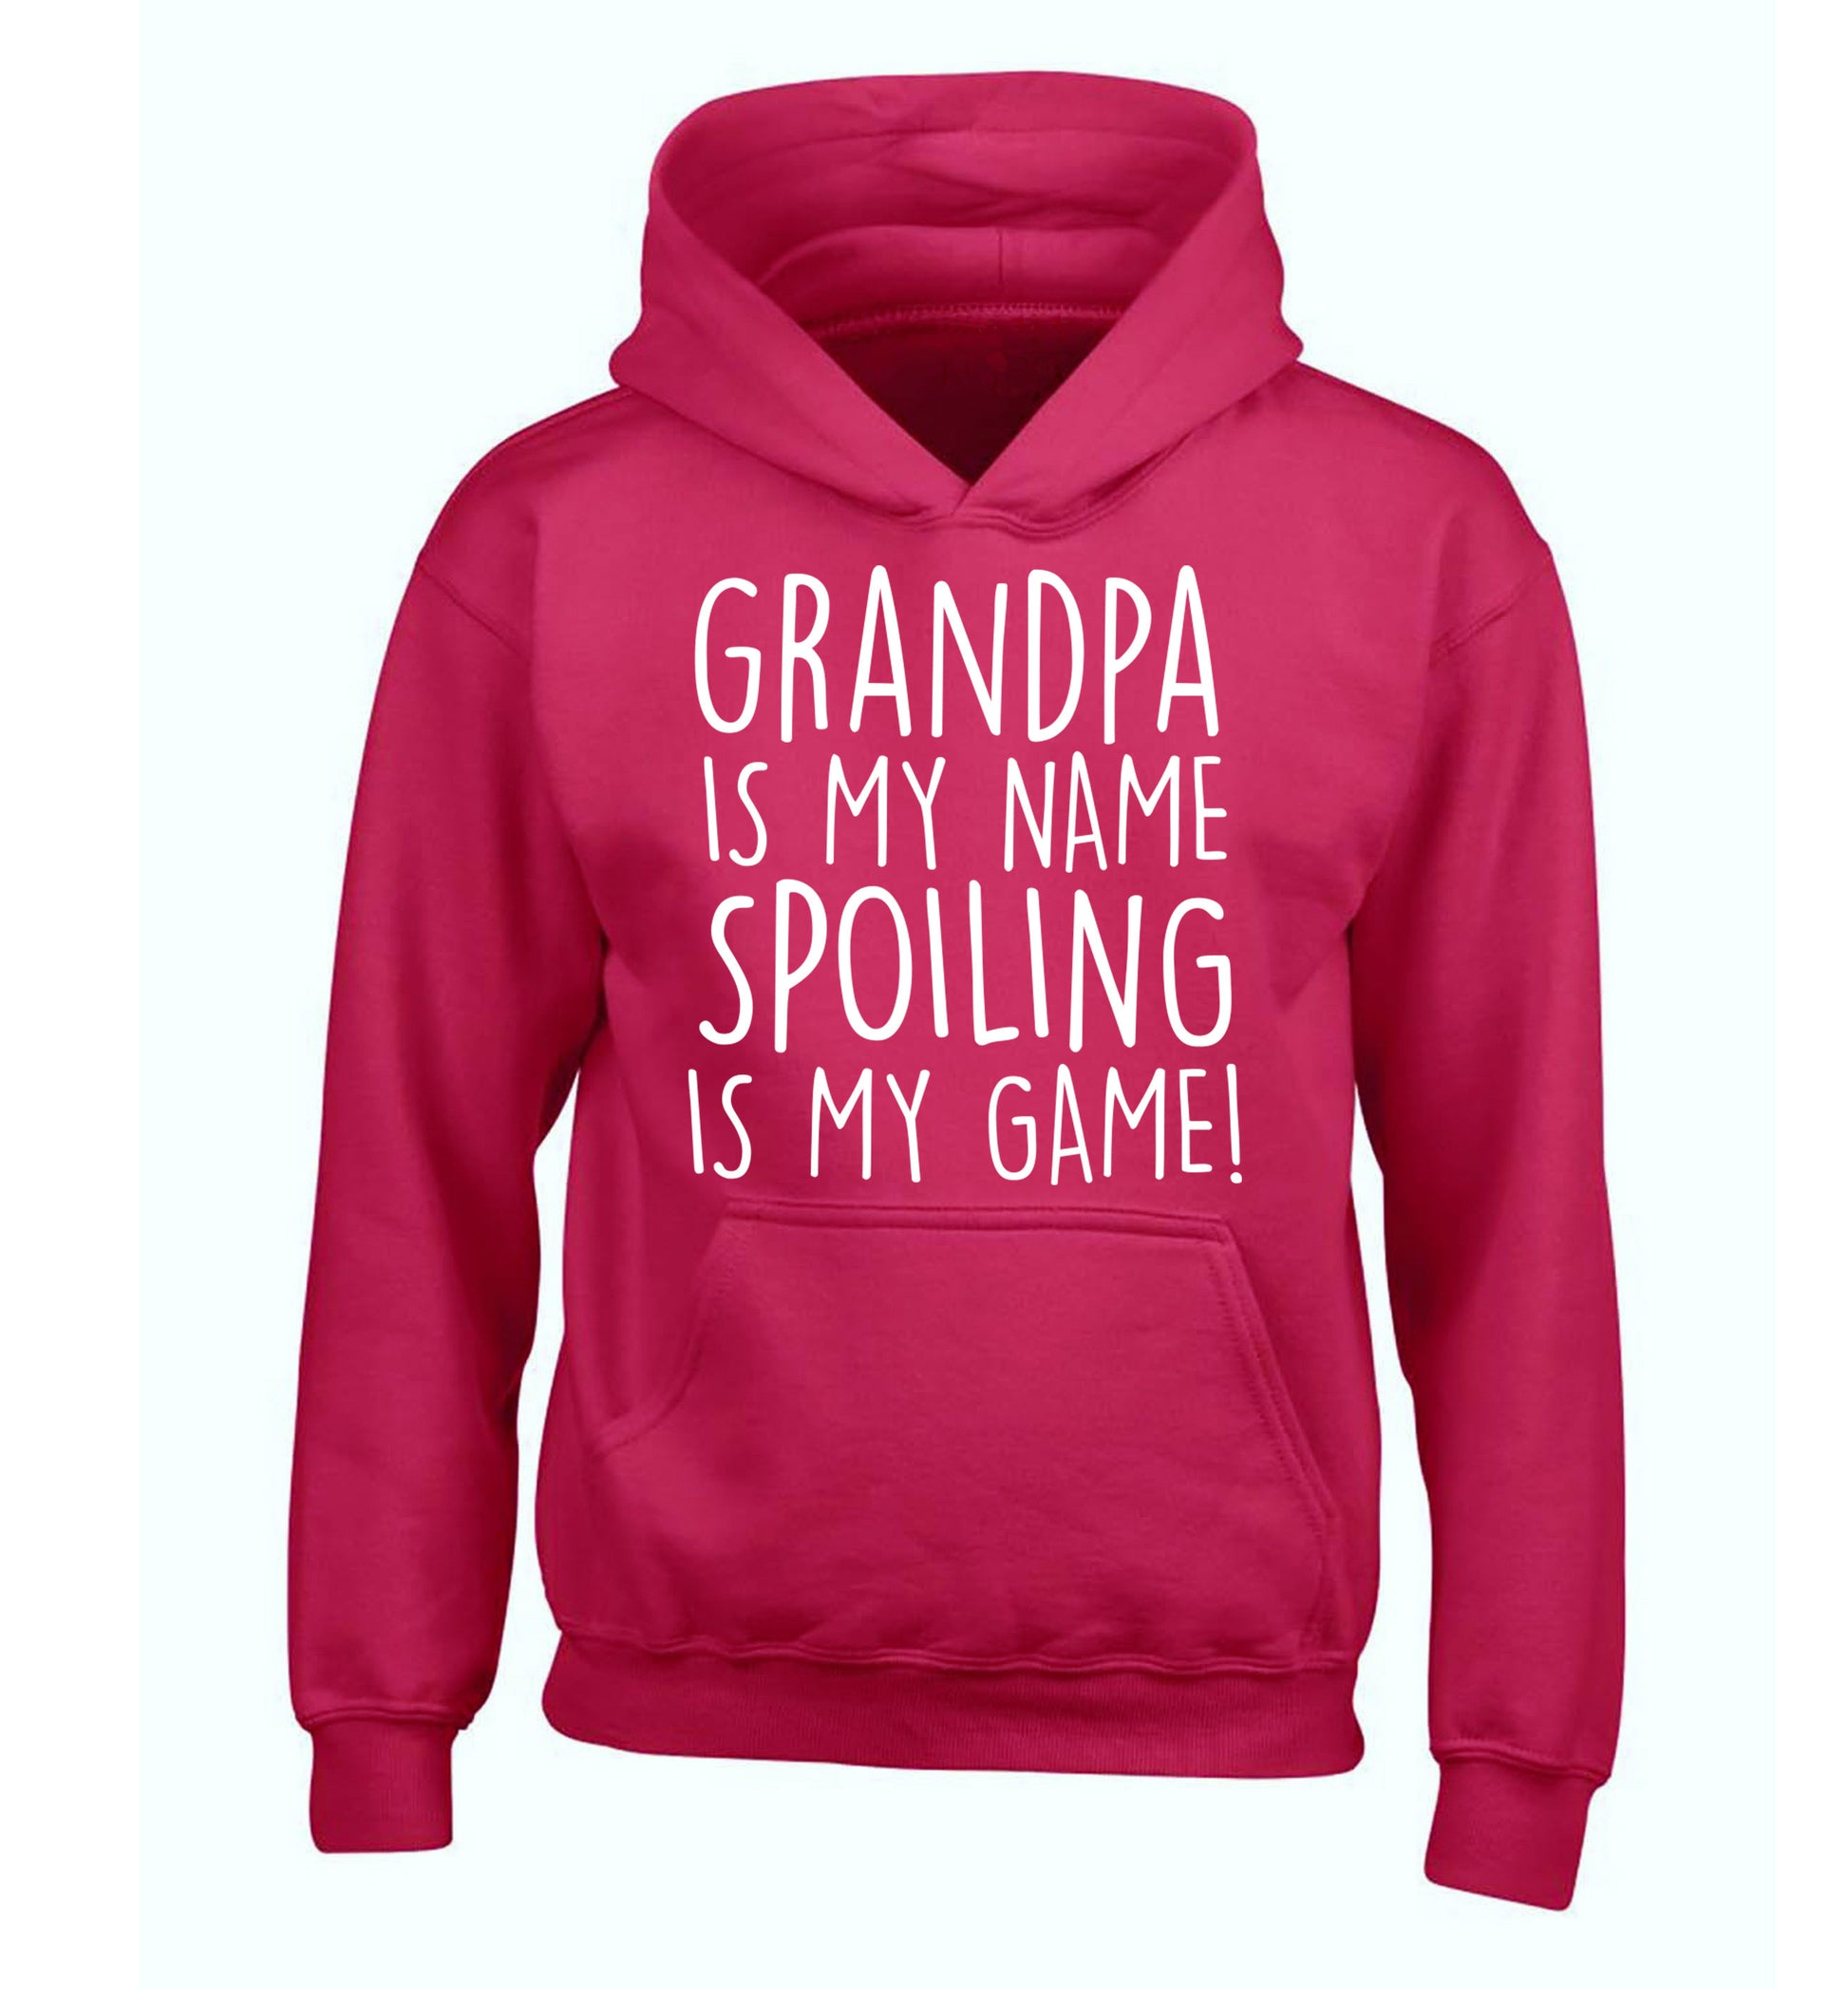 Grandpa is my name, spoiling is my game children's pink hoodie 12-14 Years